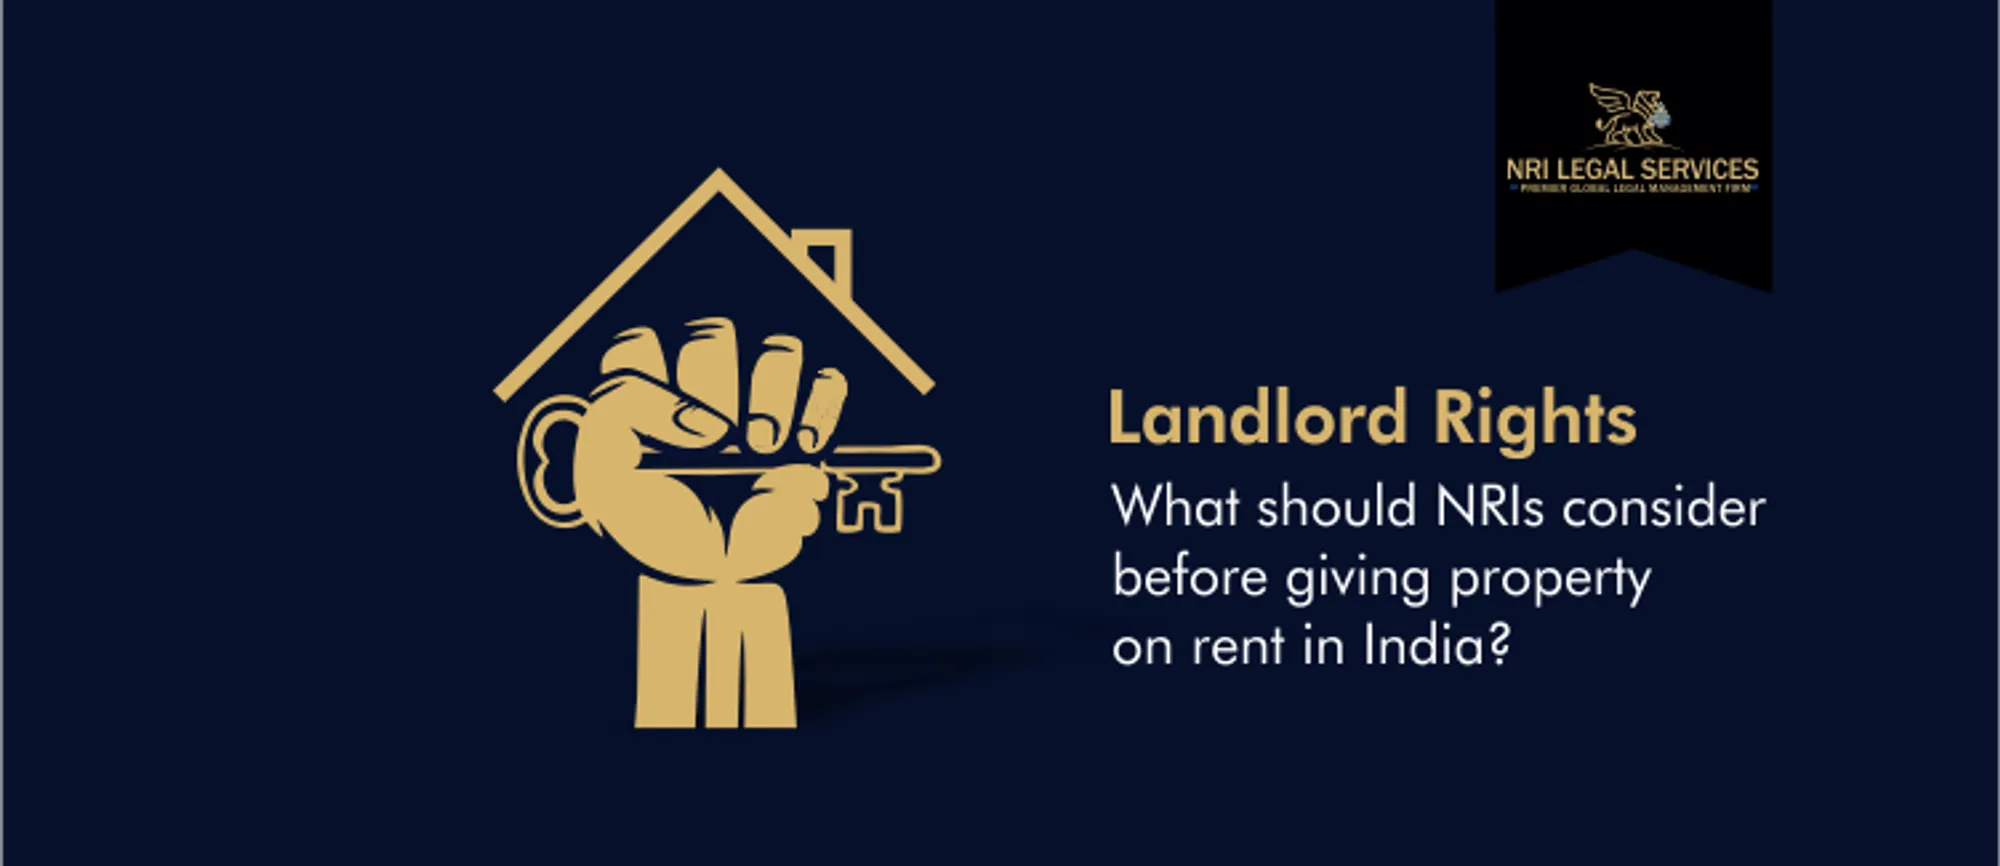 Landlord rights What should NRIs consider before giving property on rent in India